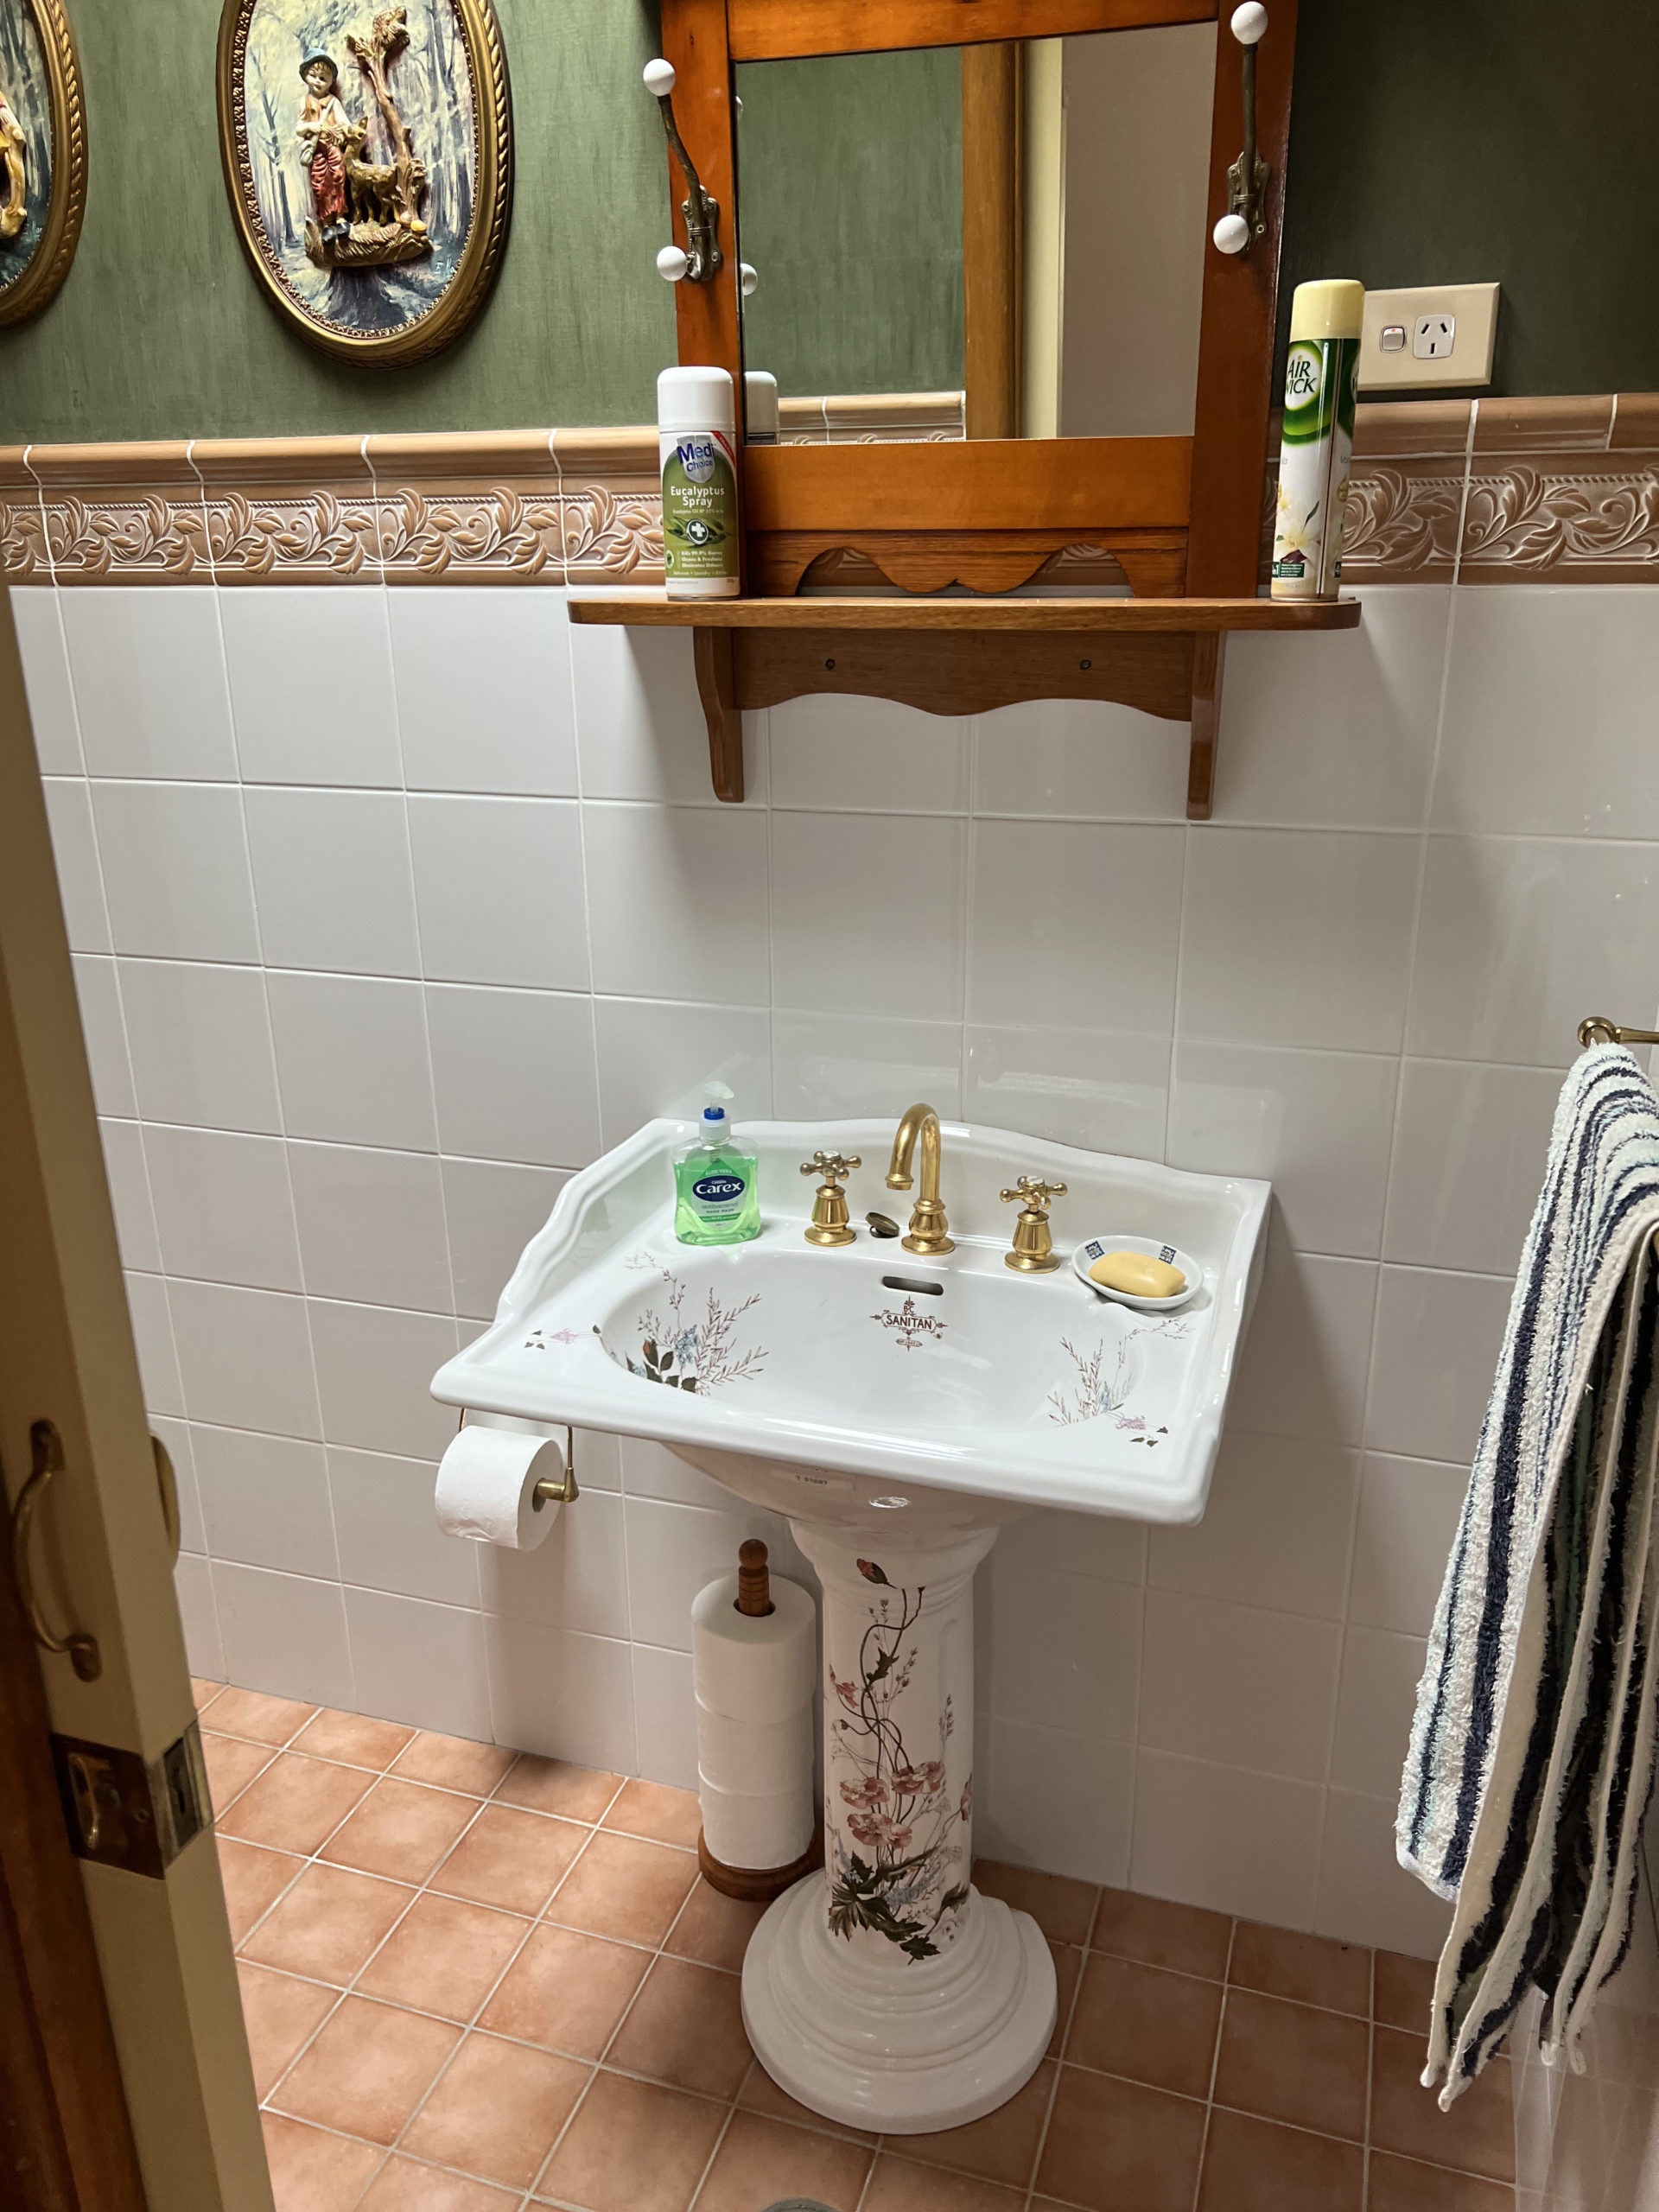 floral decorated sink and fancy bathroom tiles